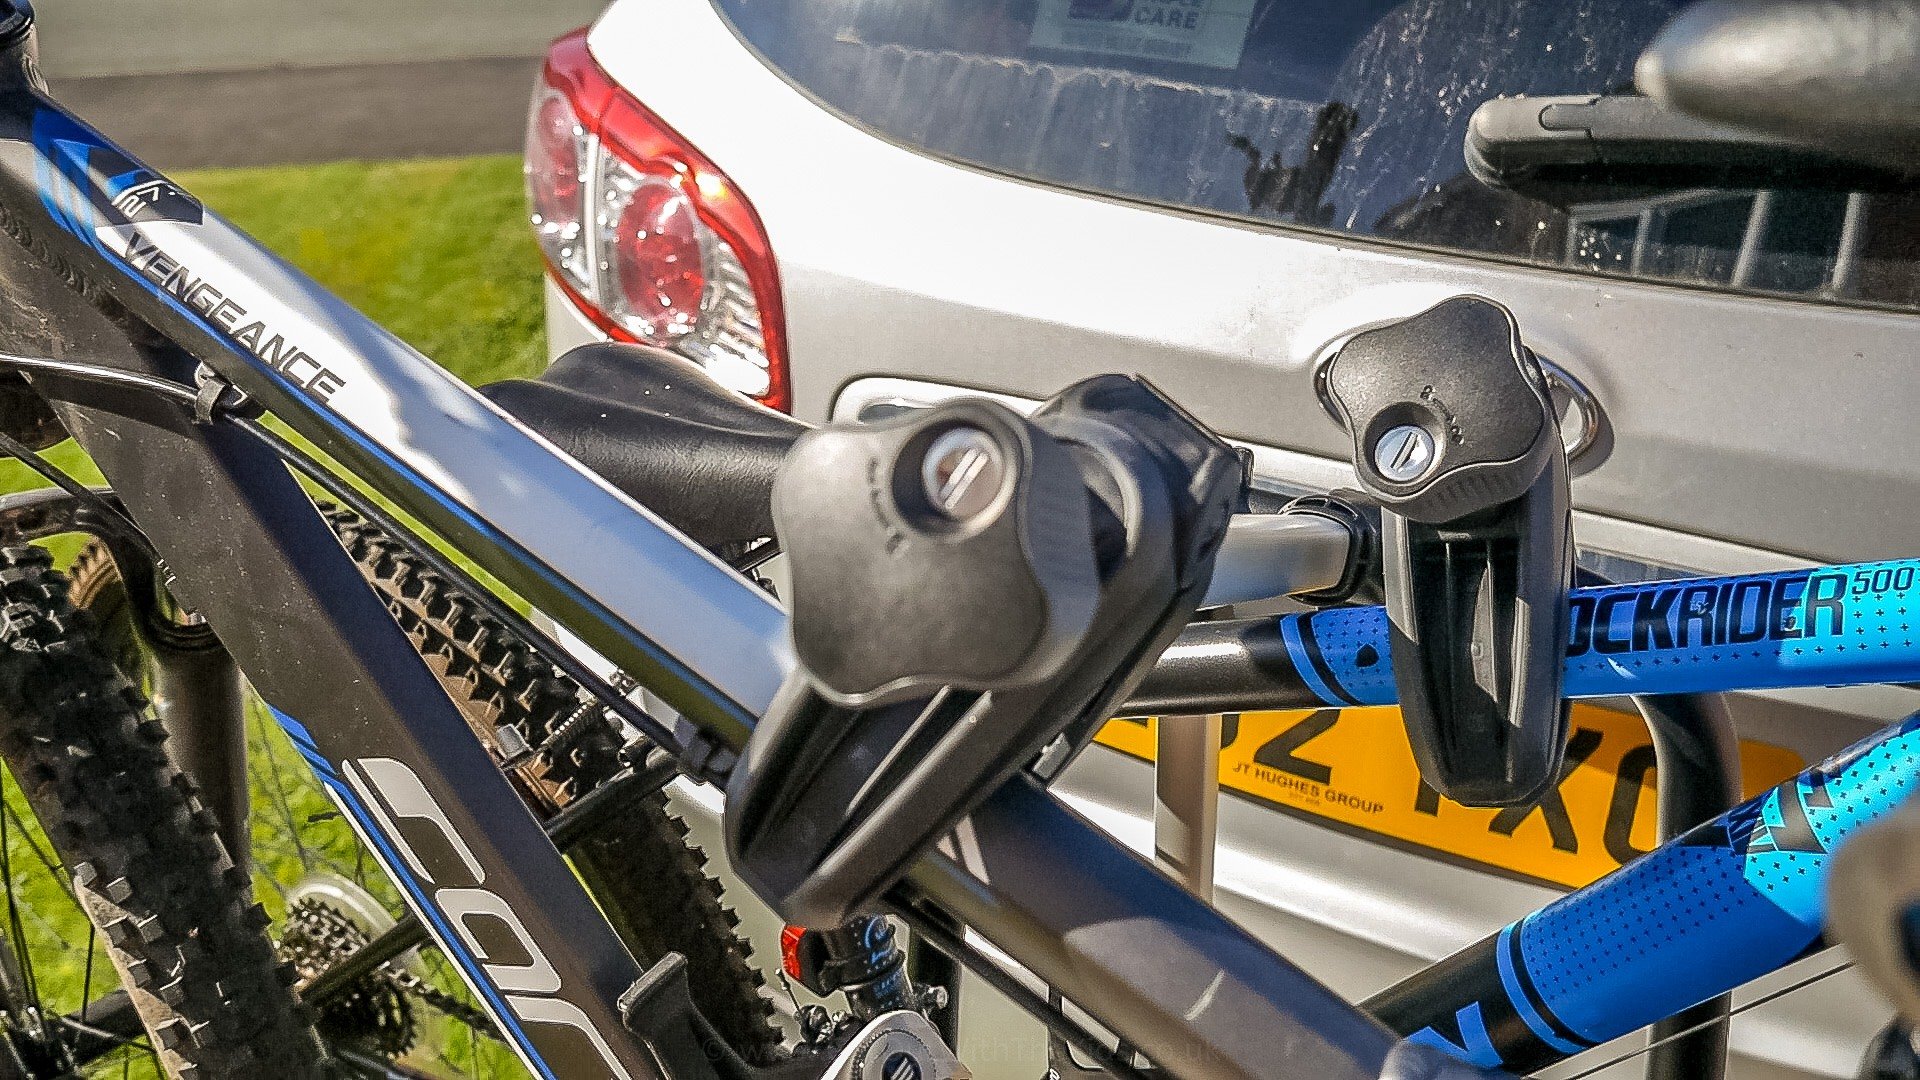 Lockable Cycle Carrier